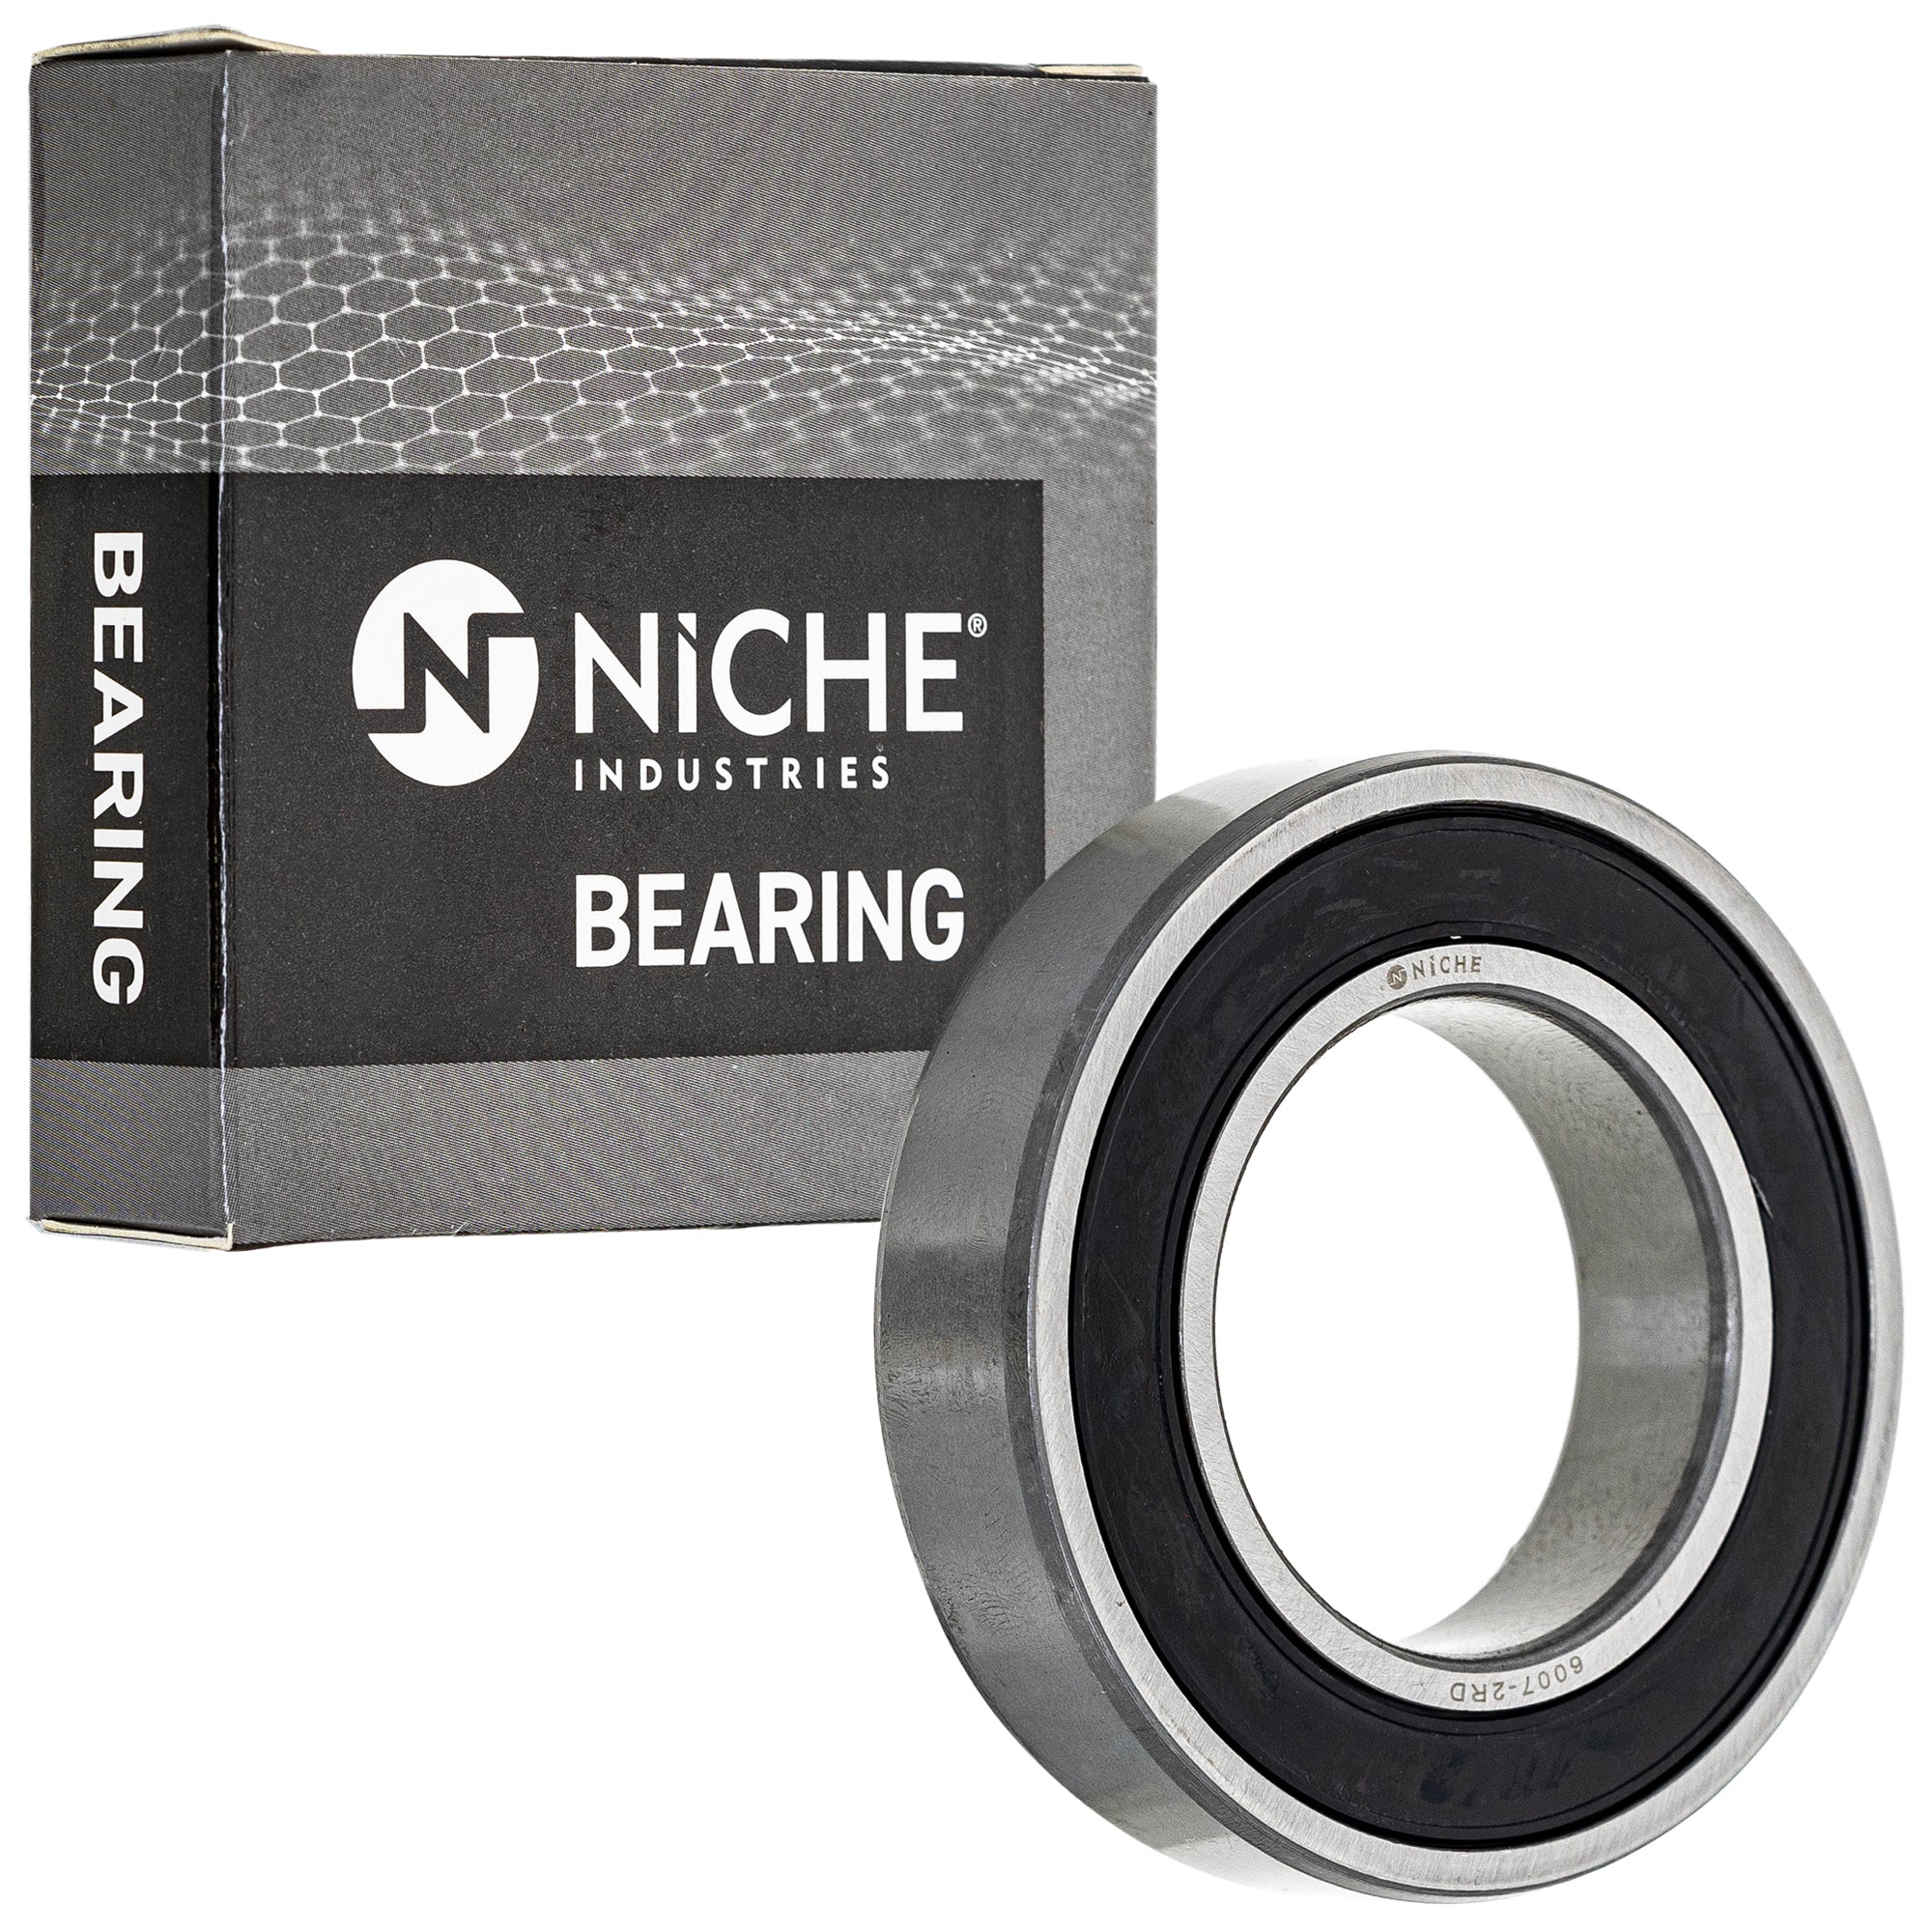 NICHE 519-CBB2274R Bearing 10-Pack for zOTHER Tri Raptor Rally Mojave